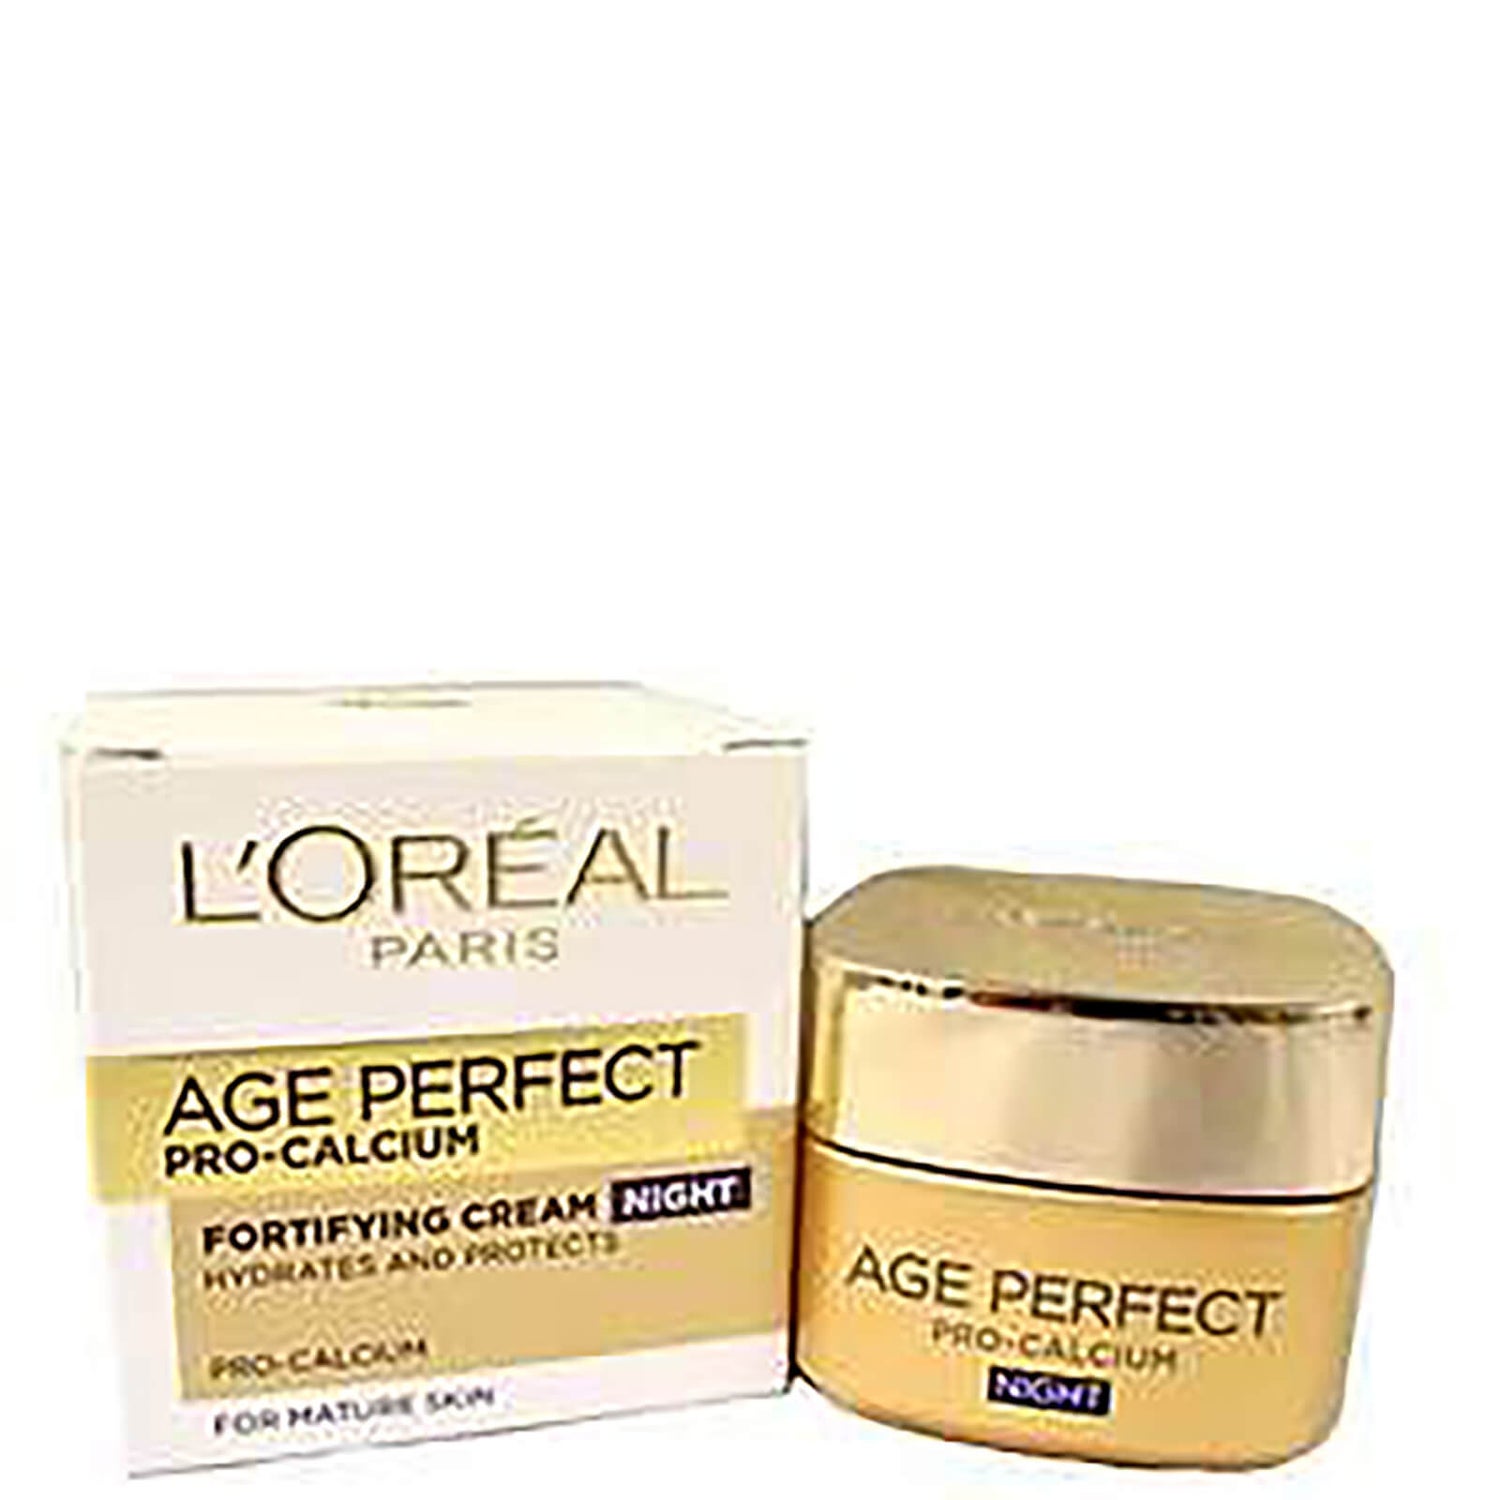 L'Oreal Paris Dermo Expertise Age Perfect Pro Calcium Fortifying Night Cream (50 ml)